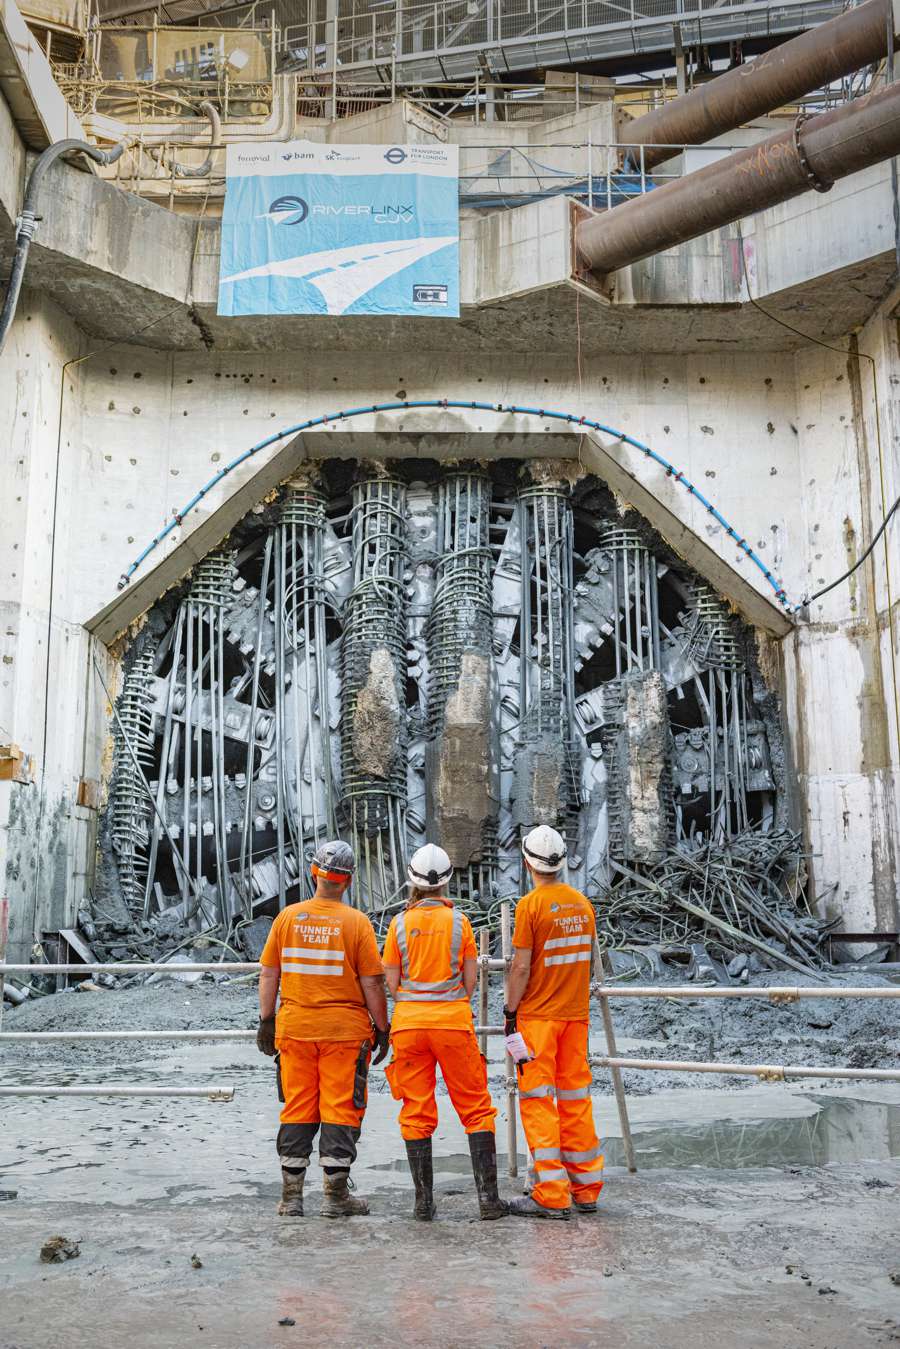 On July 23, 2023, the site crews in Londonachieved the successful final breakthrough with
the Herrenknecht EPB Shield in the Silvertown
Tunnel project.